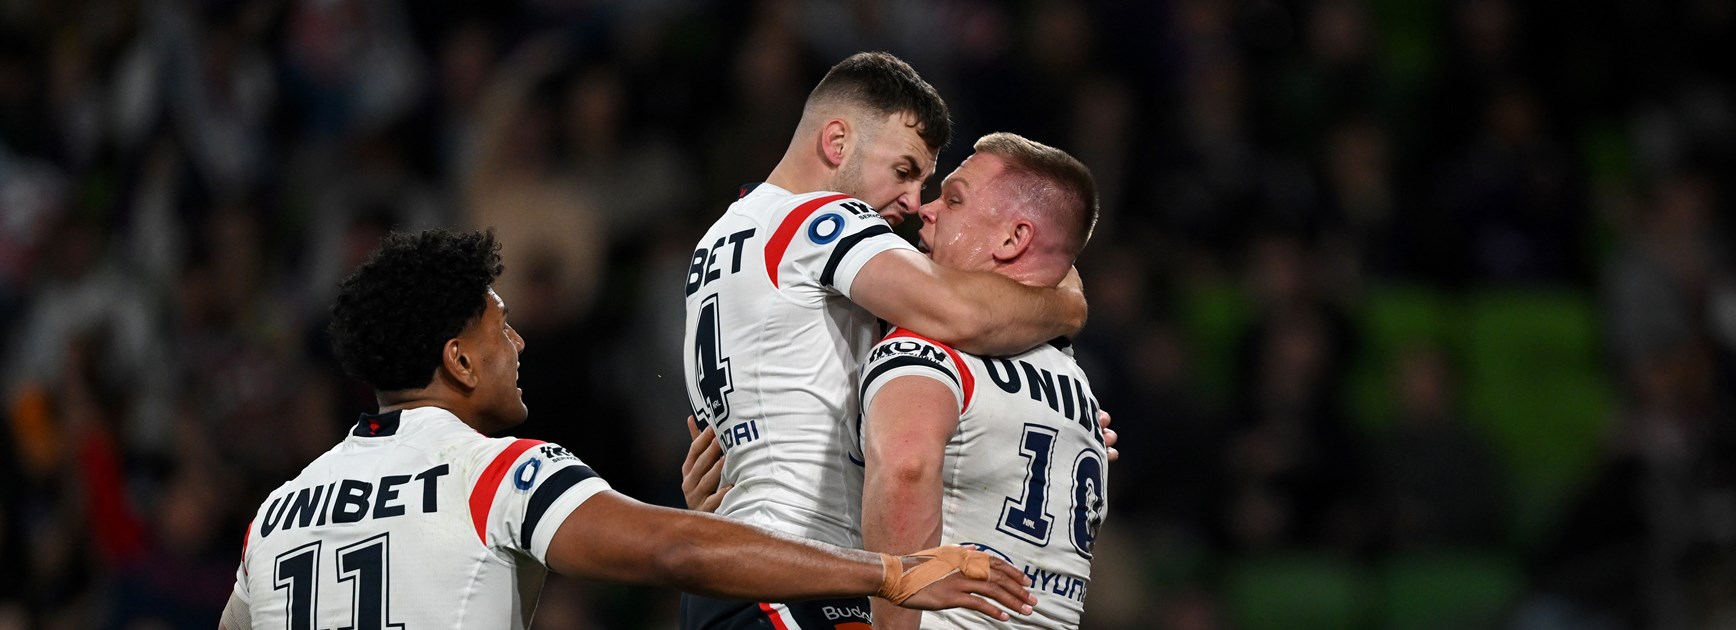 Brave Roosters Unable to Overcome Storm in Semi